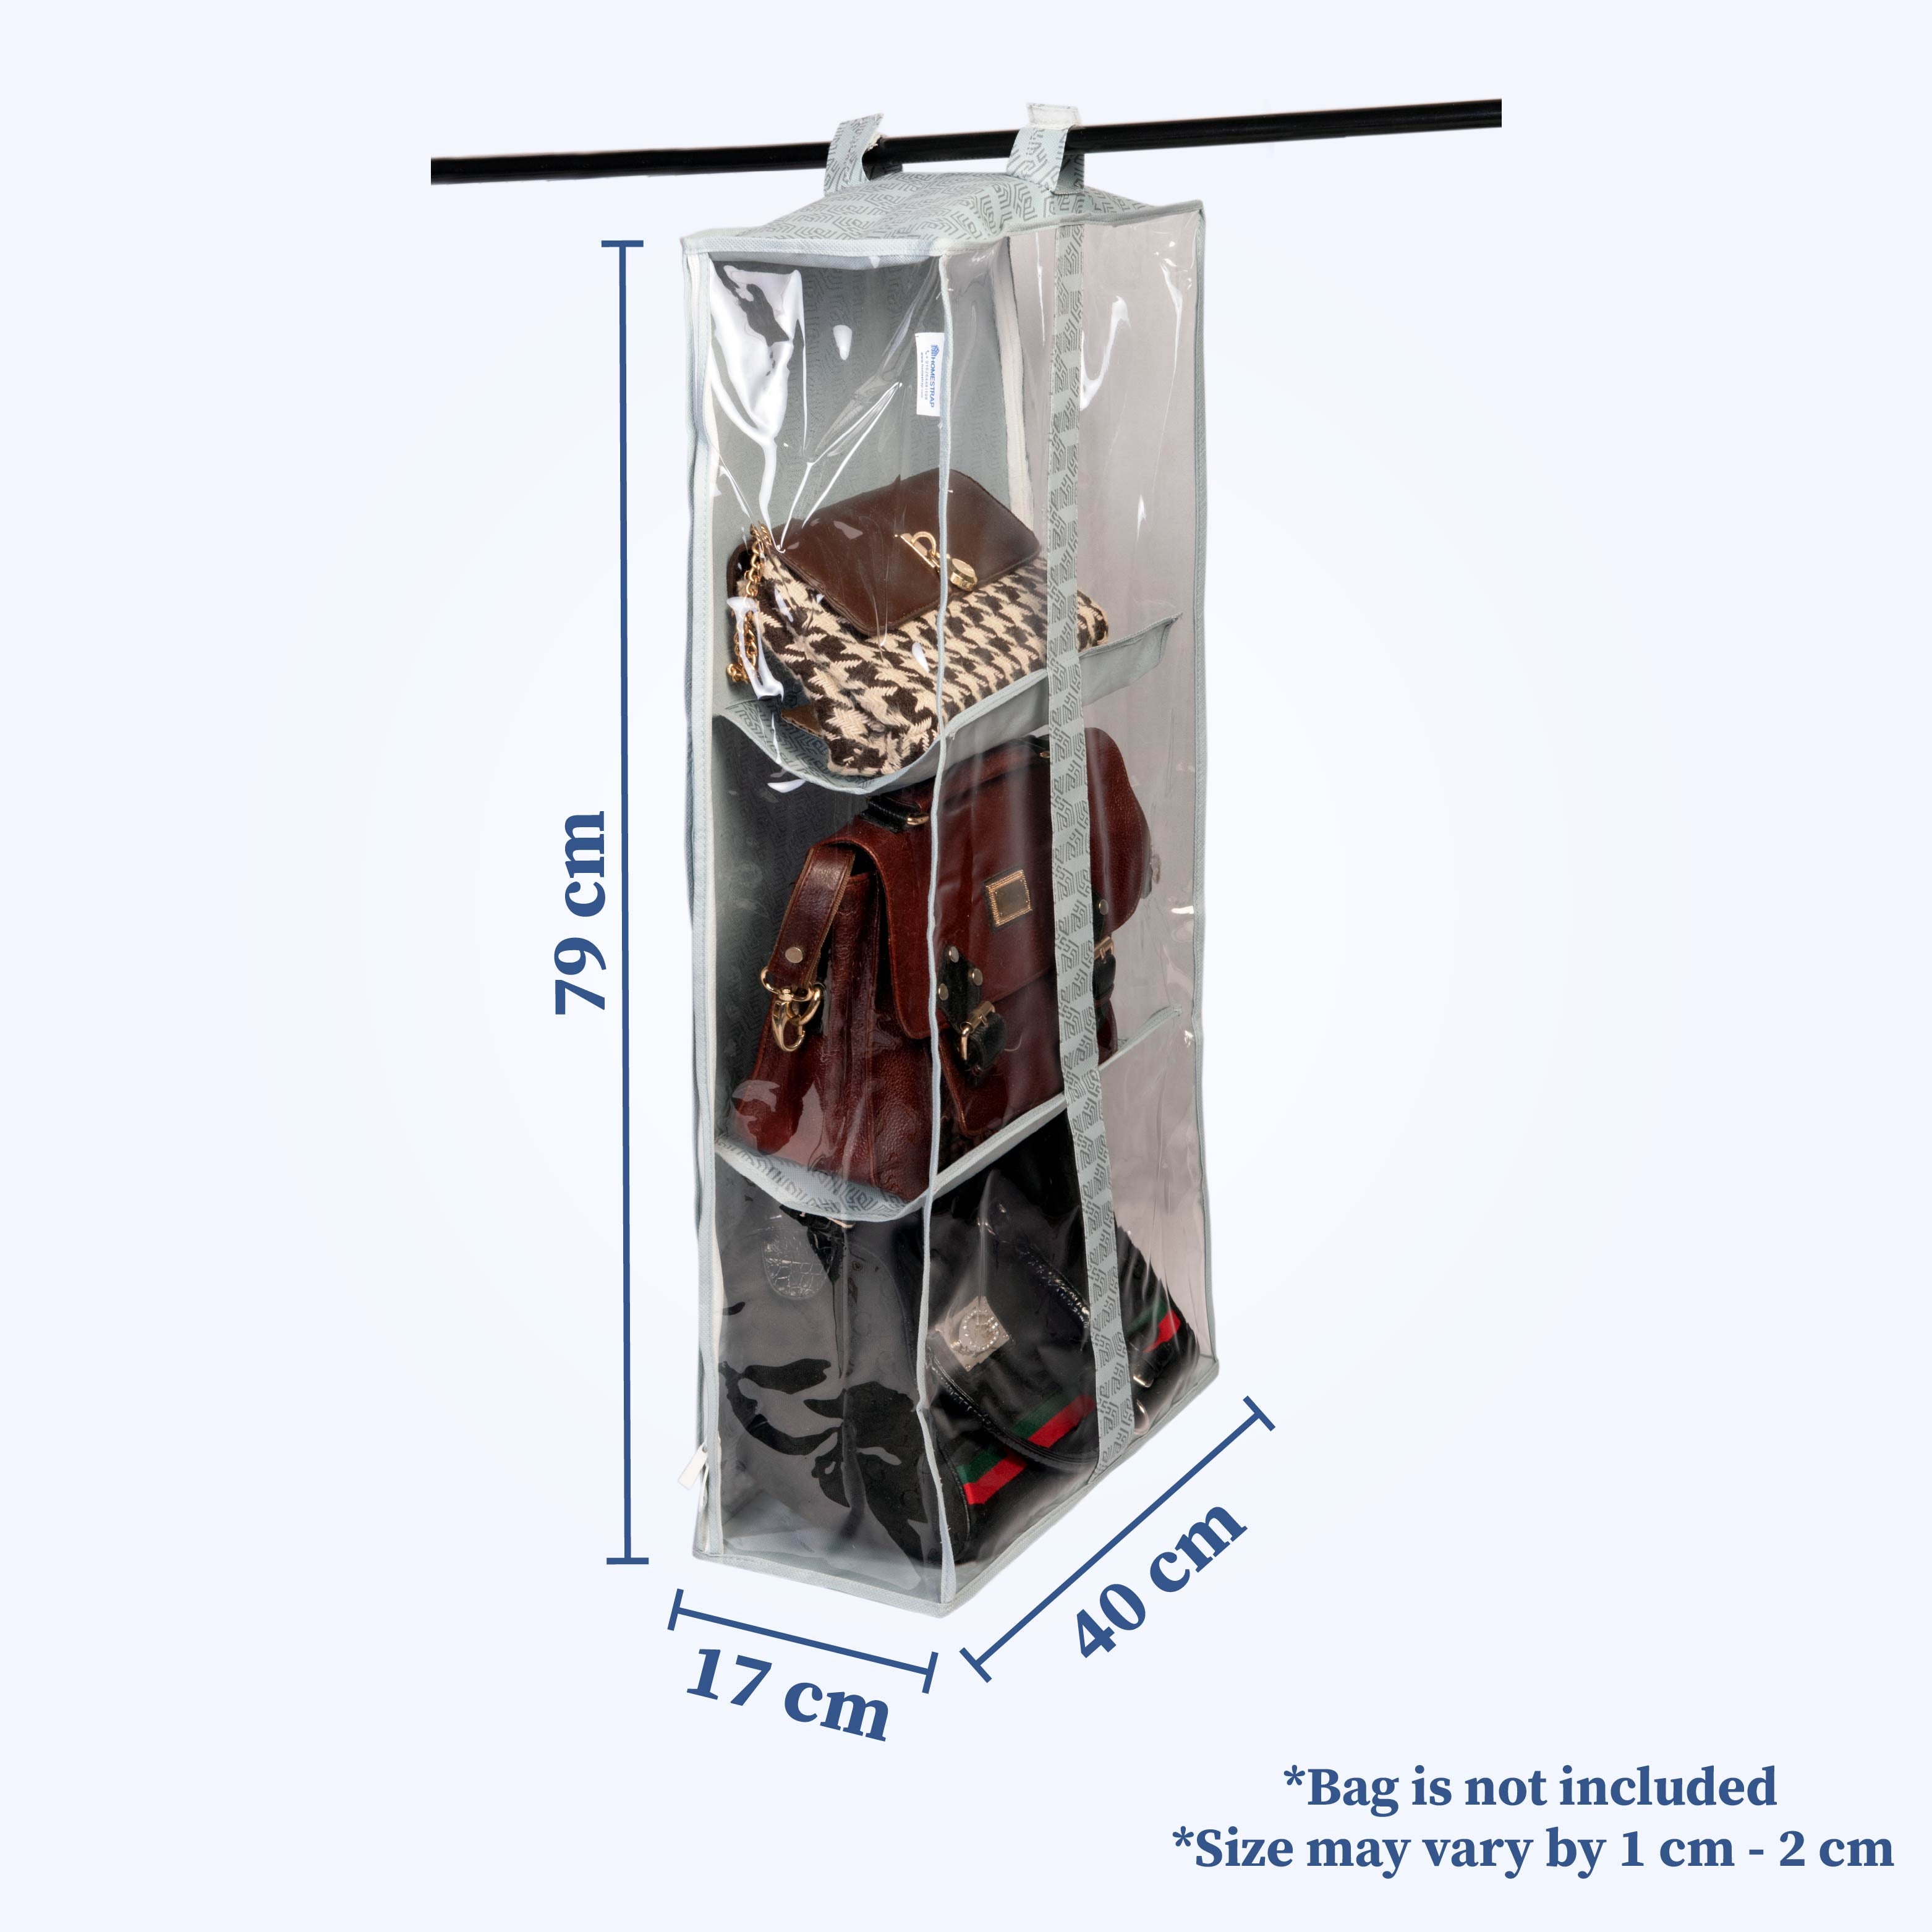 Durable wardrobe organizers at affordable prices I Homestrap